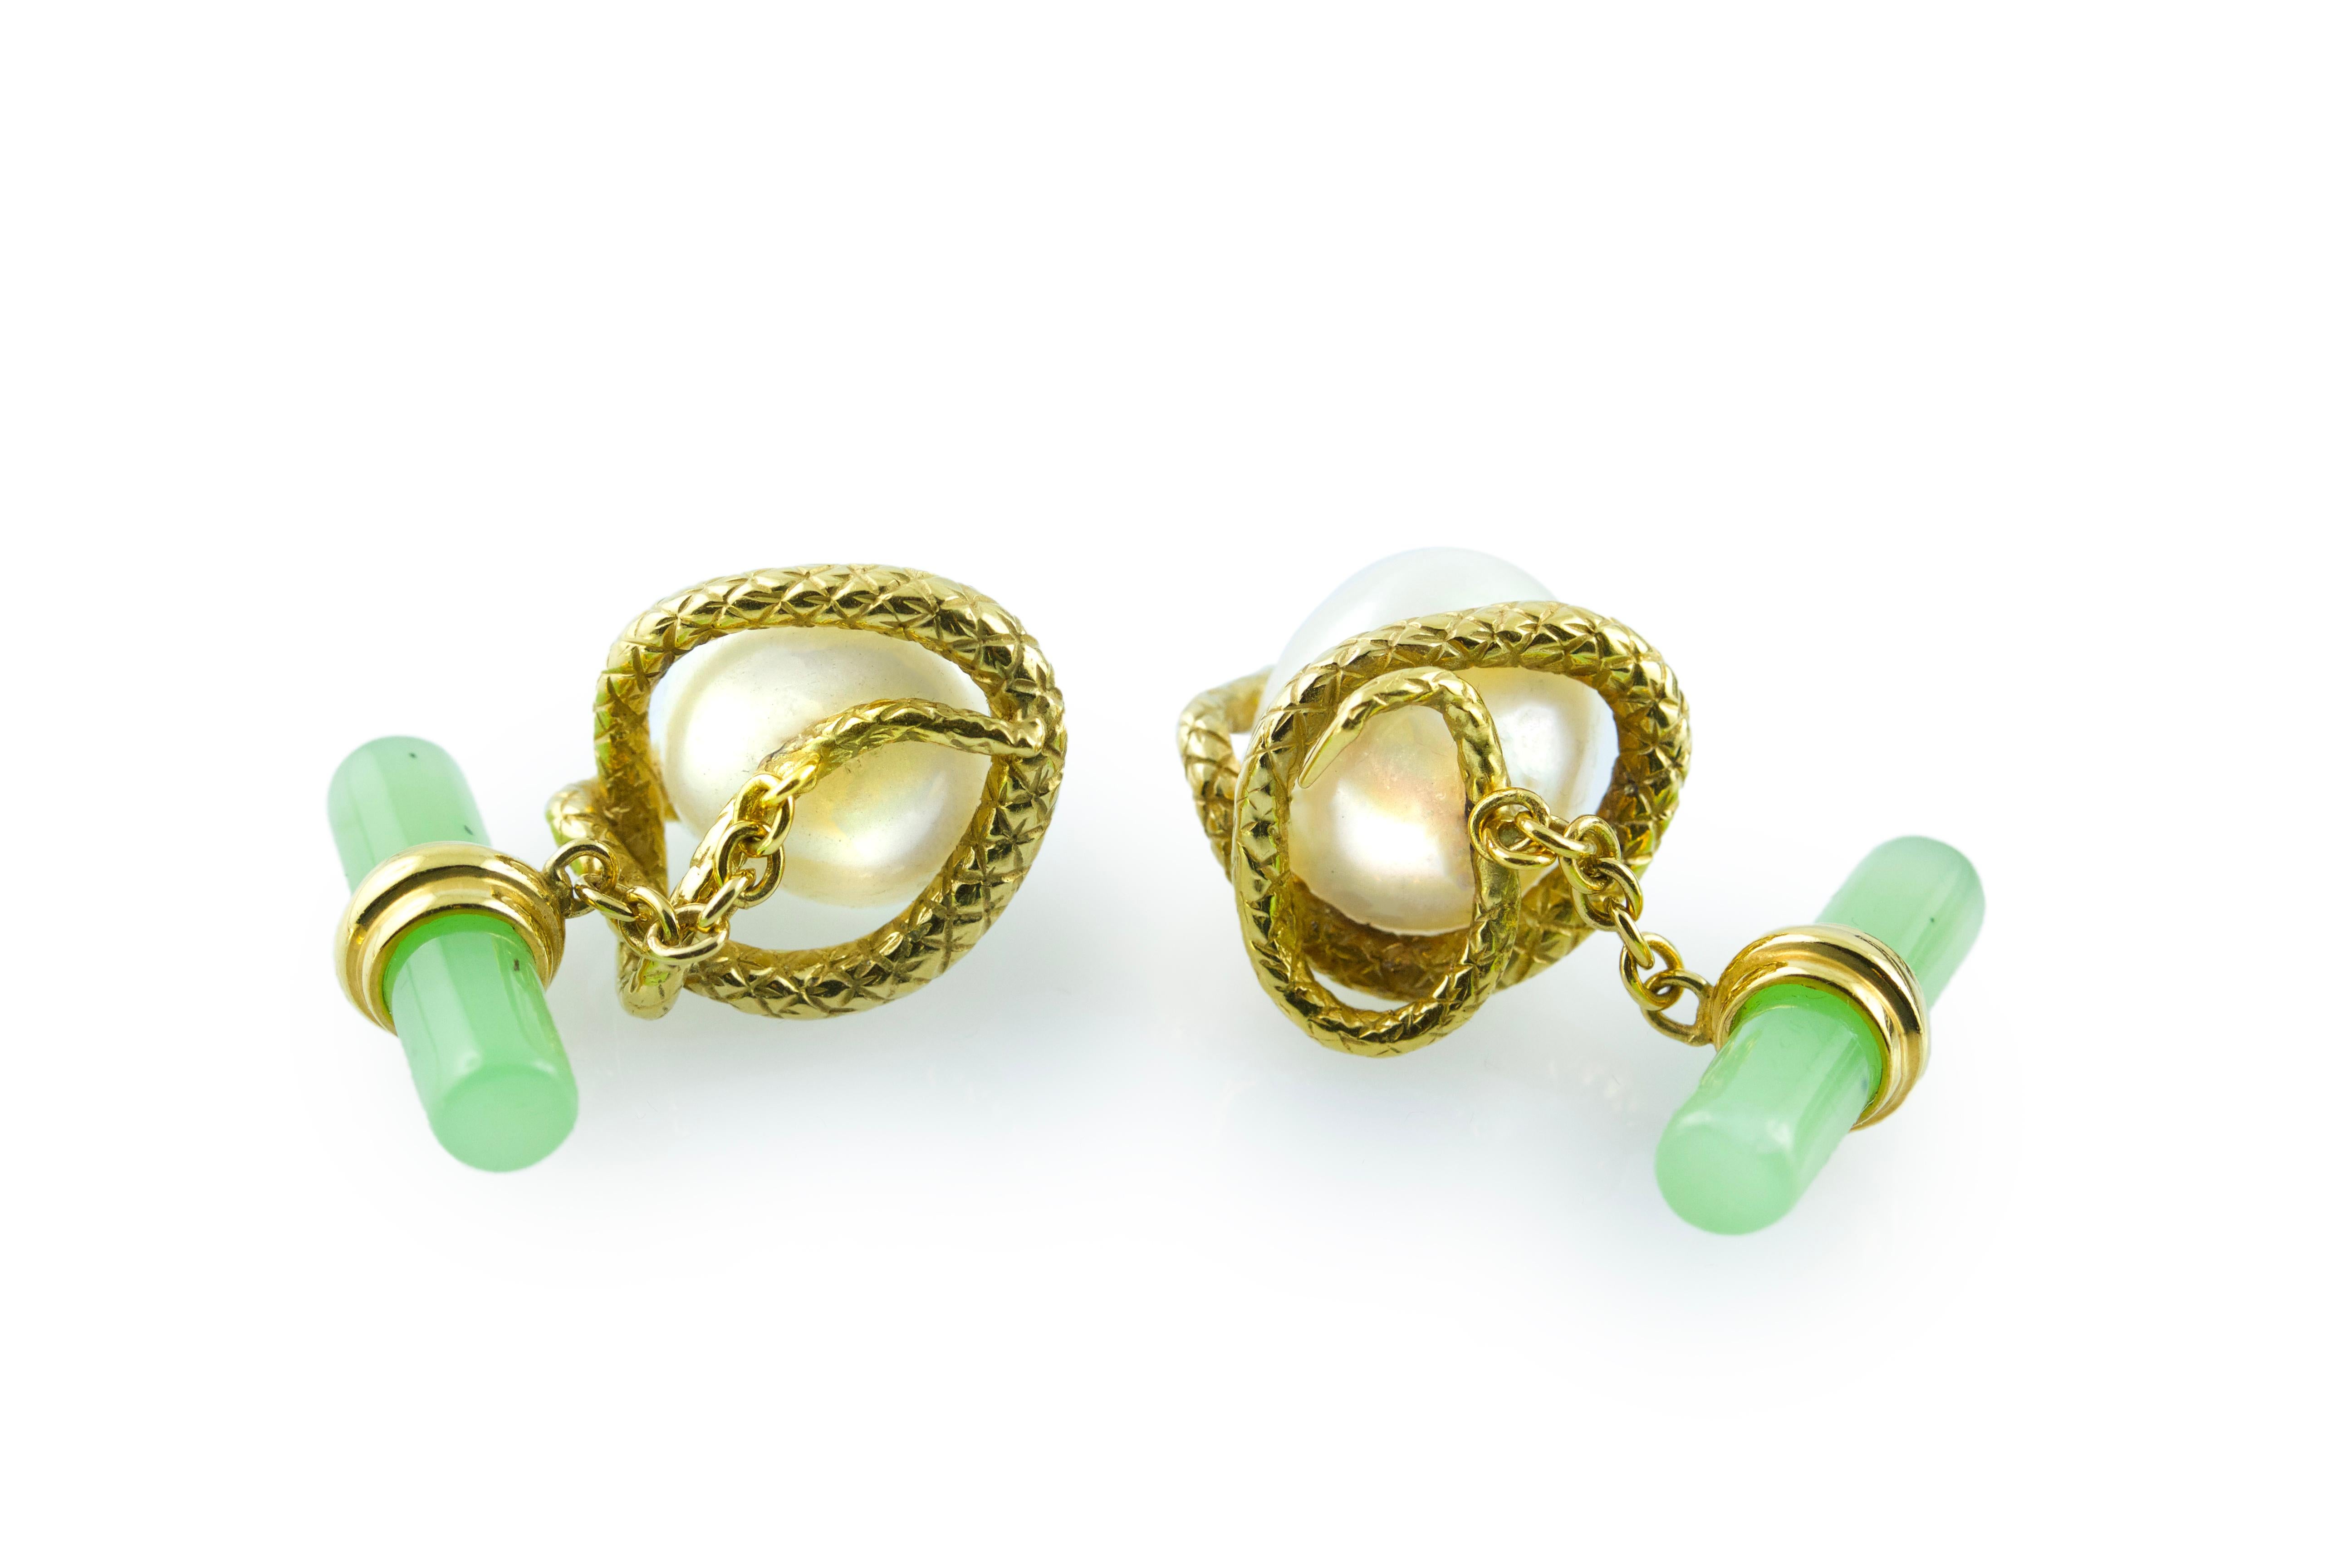 This magnificent pair of cufflinks features a baroque pearl gracing the front face, mounted on an 18 karat yellow gold piece shaped as a snake coiled all around the pearl. 
In gold is also the post that wraps around the cylindrical shape of the